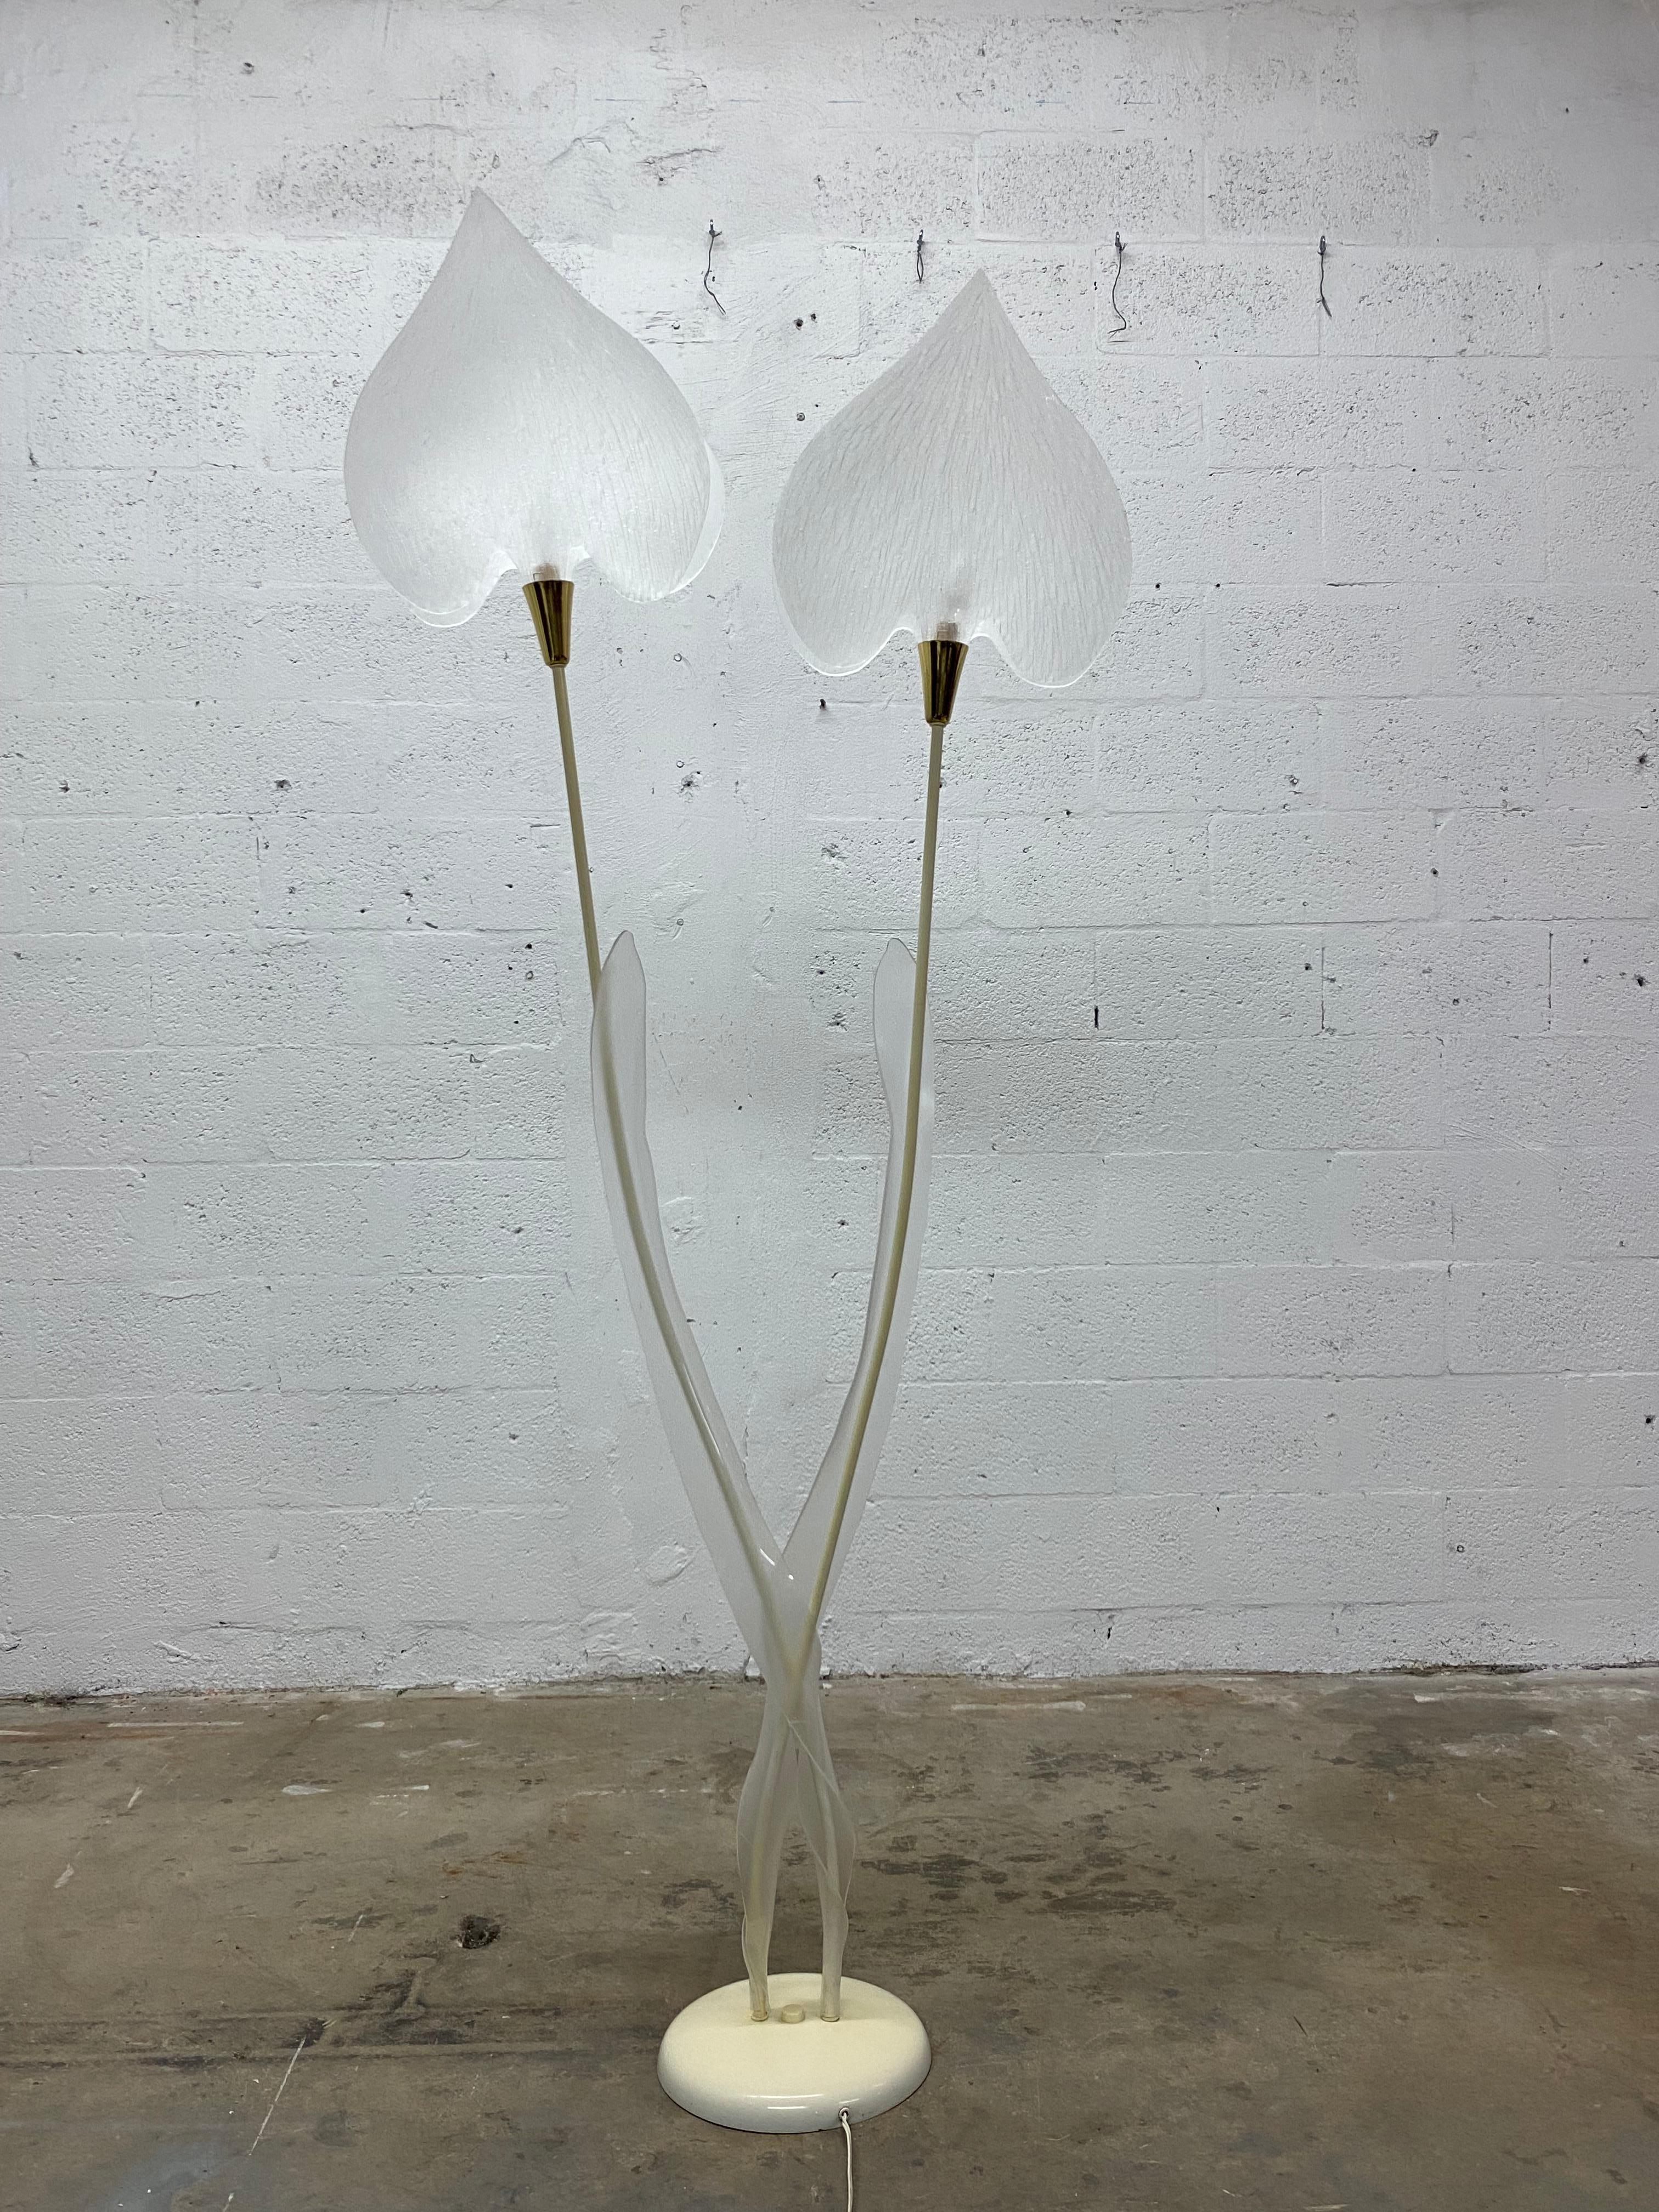 Mid-century floor lamp with opaque lucite leaf shades attached to brass sockets and connected to long, thin bent rods to resemble a tree or plant.